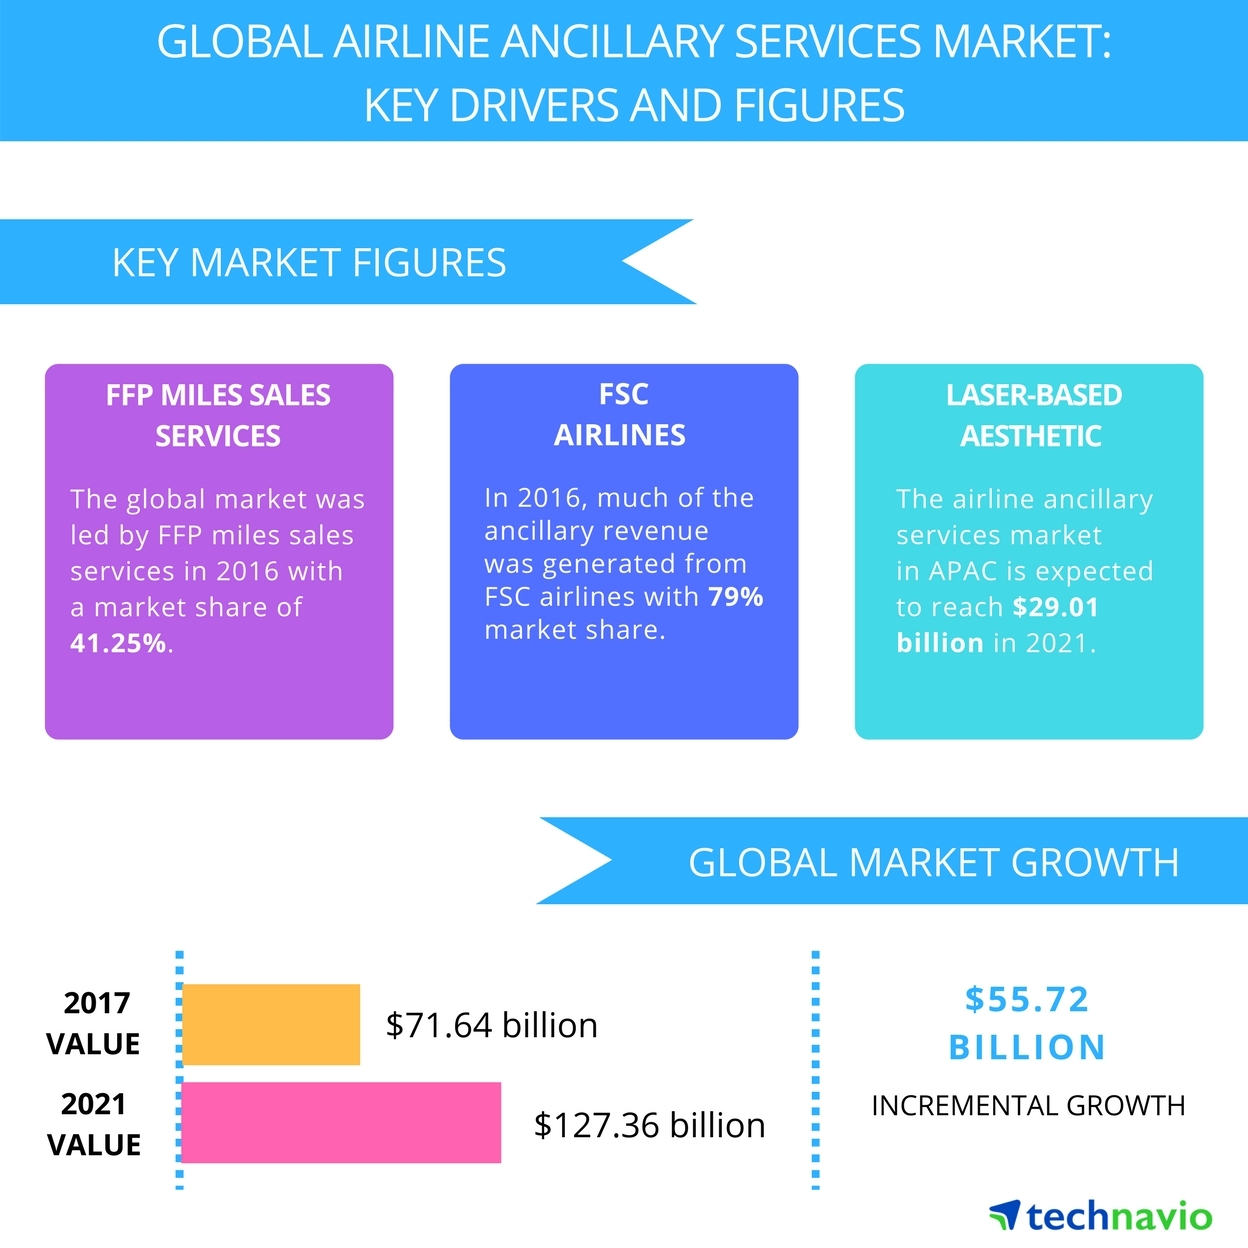 Top 5 Vendors in the Global Airline Ancillary Services Market From